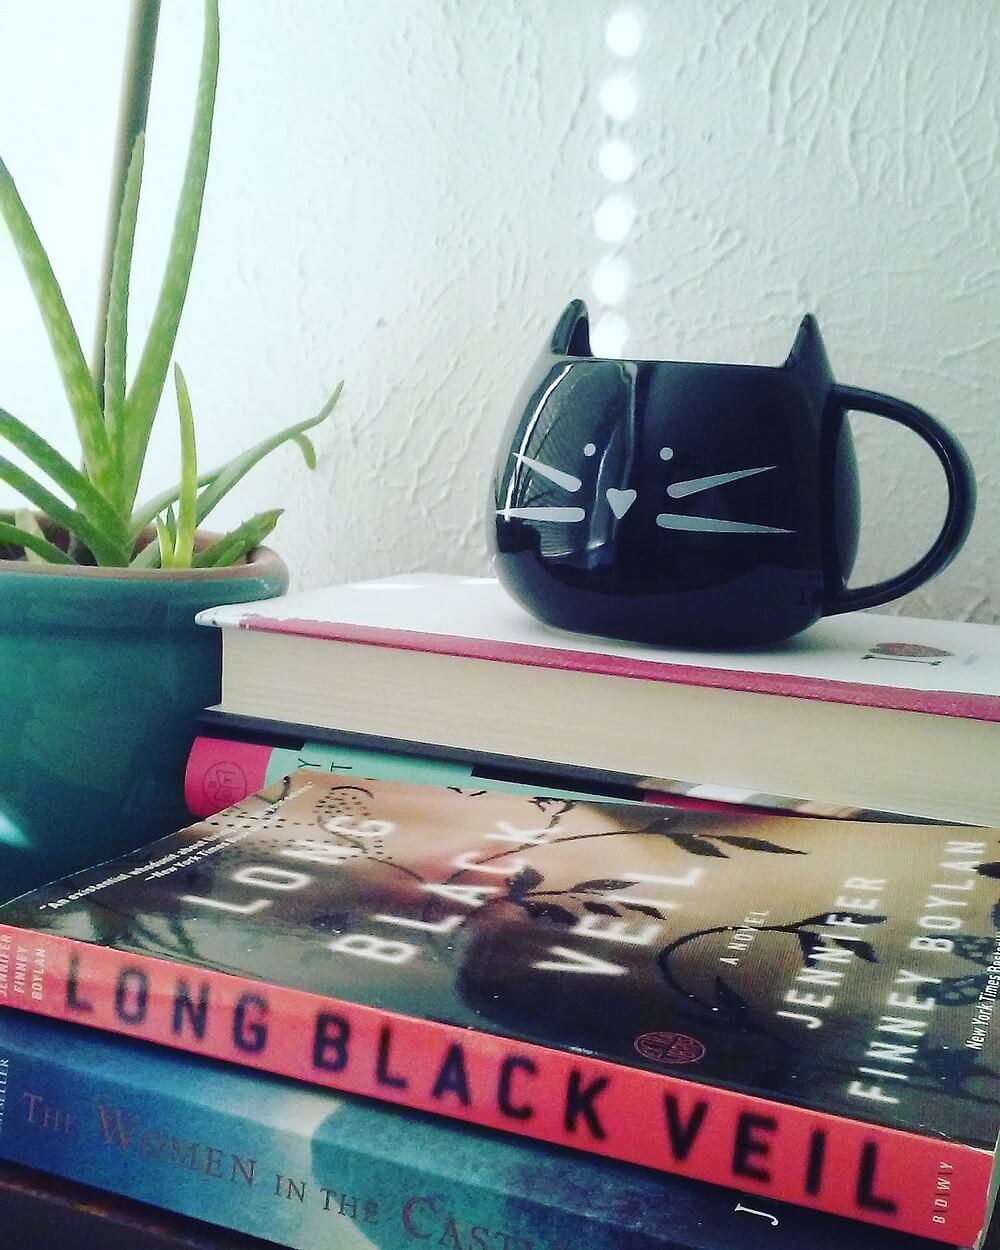 Photo of black-and-white cat face-shaped mug sitting atop hardcover books (titles not shown, but the second one has a BOTM logo), with two paperback books in front of them ("The Women in the Castle" and "Long Black Veil"); in the far corner to the side of the hardcover books is a turquoise-painted clay pot holding aloe vera. The surface, although a peek, is wood painted black.